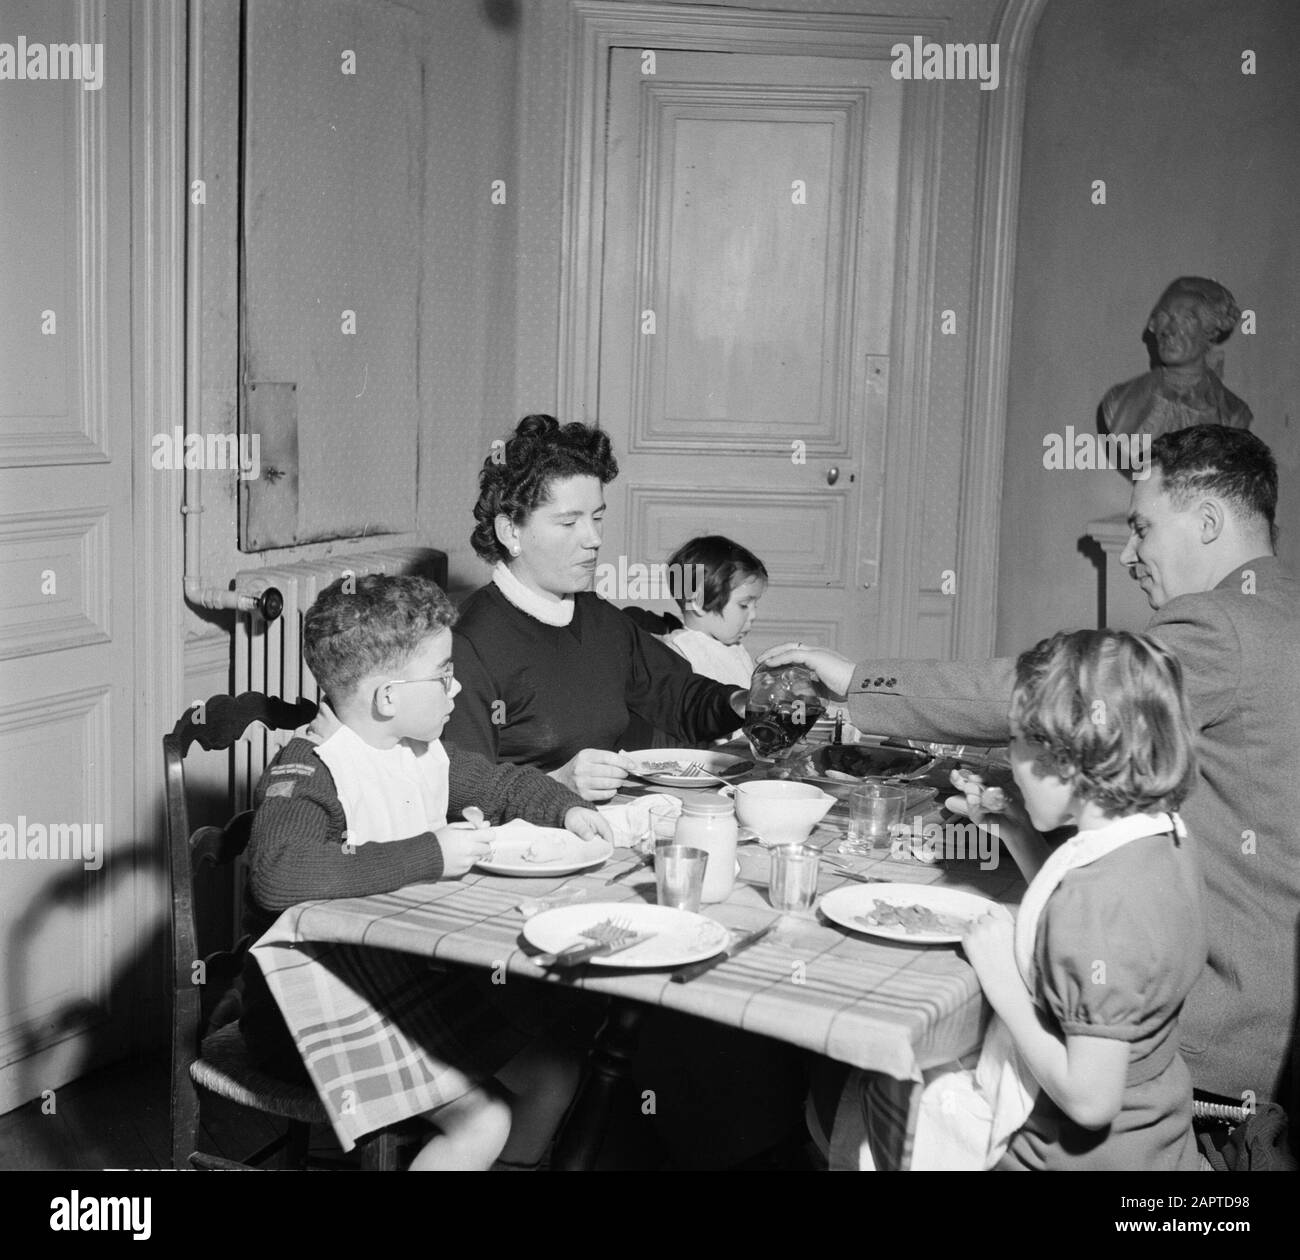 Residents of an apartment building in Paris  Family at the table during the meal Date: 1950 Location: France, Paris Keywords: families, children, meals, crockery, wine Stock Photo